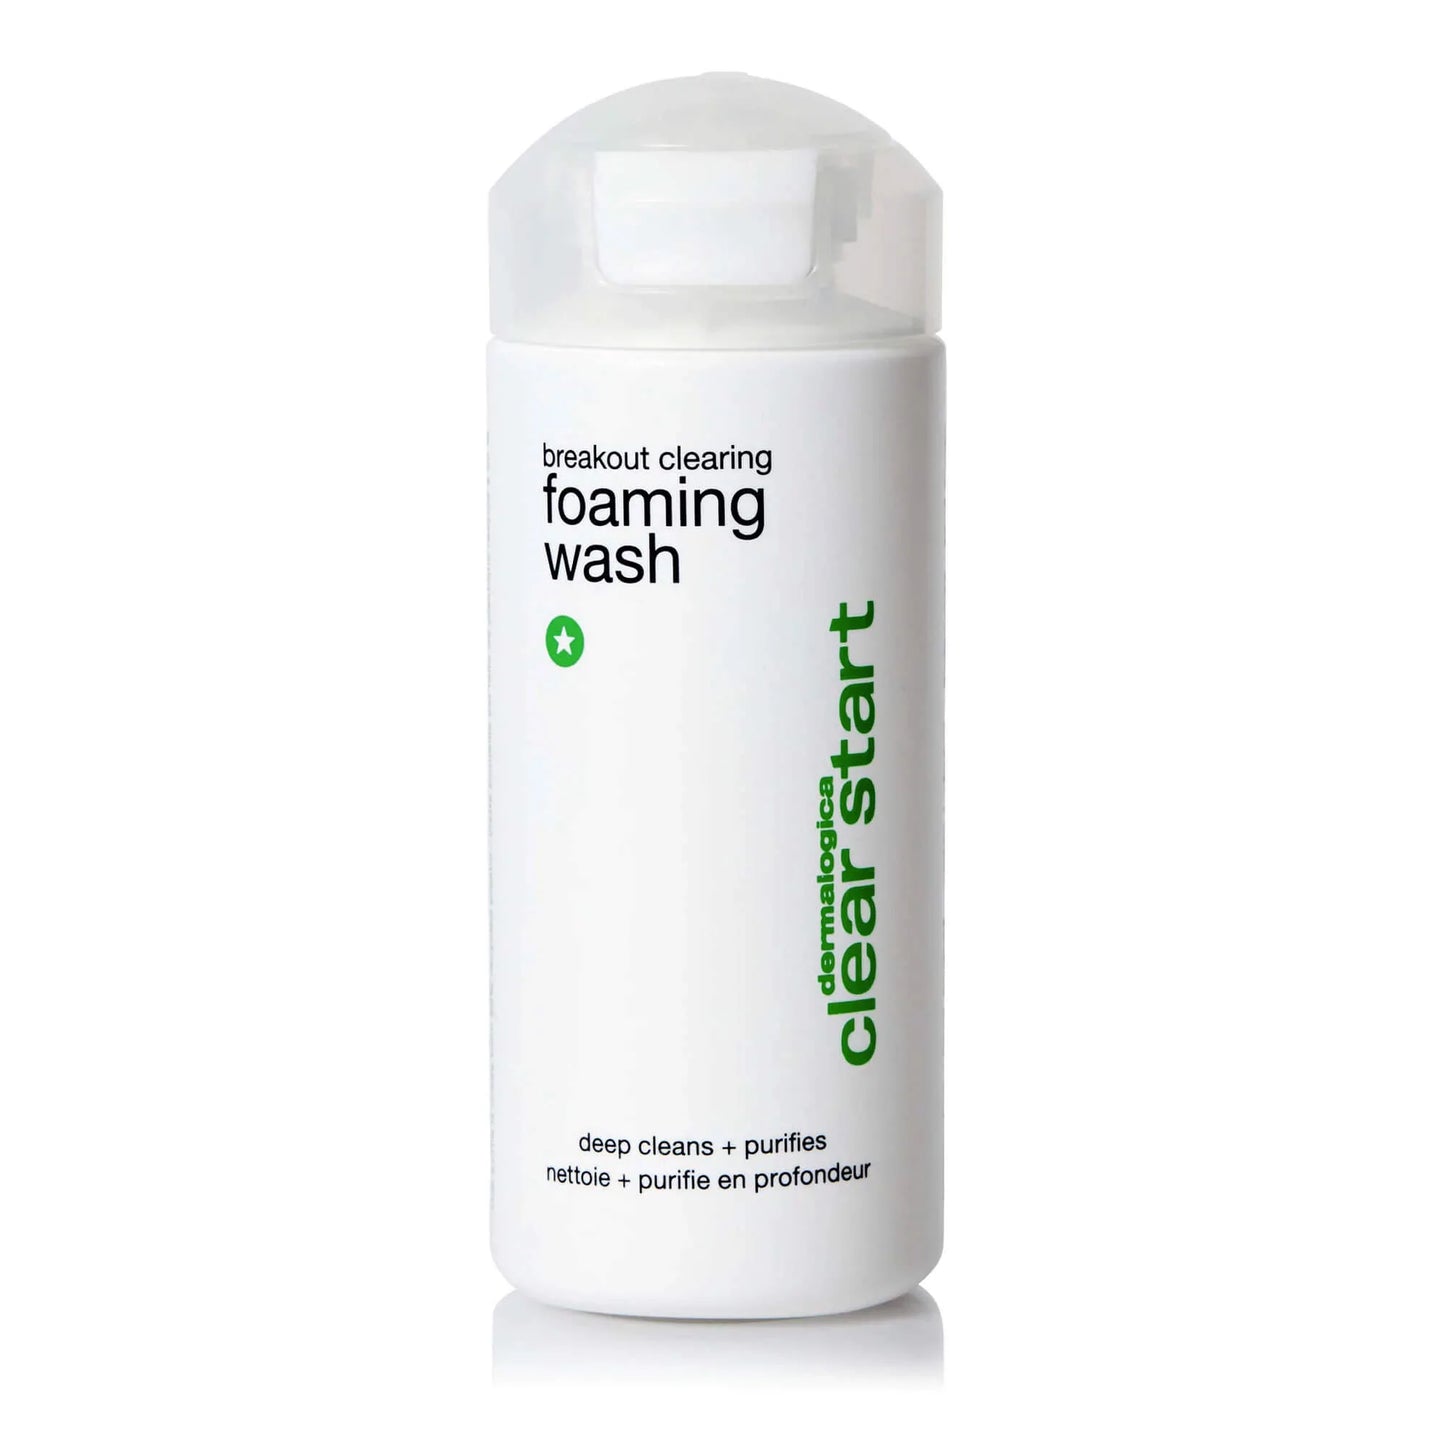 dermalogica breakout clearning foaming wash for teenagers